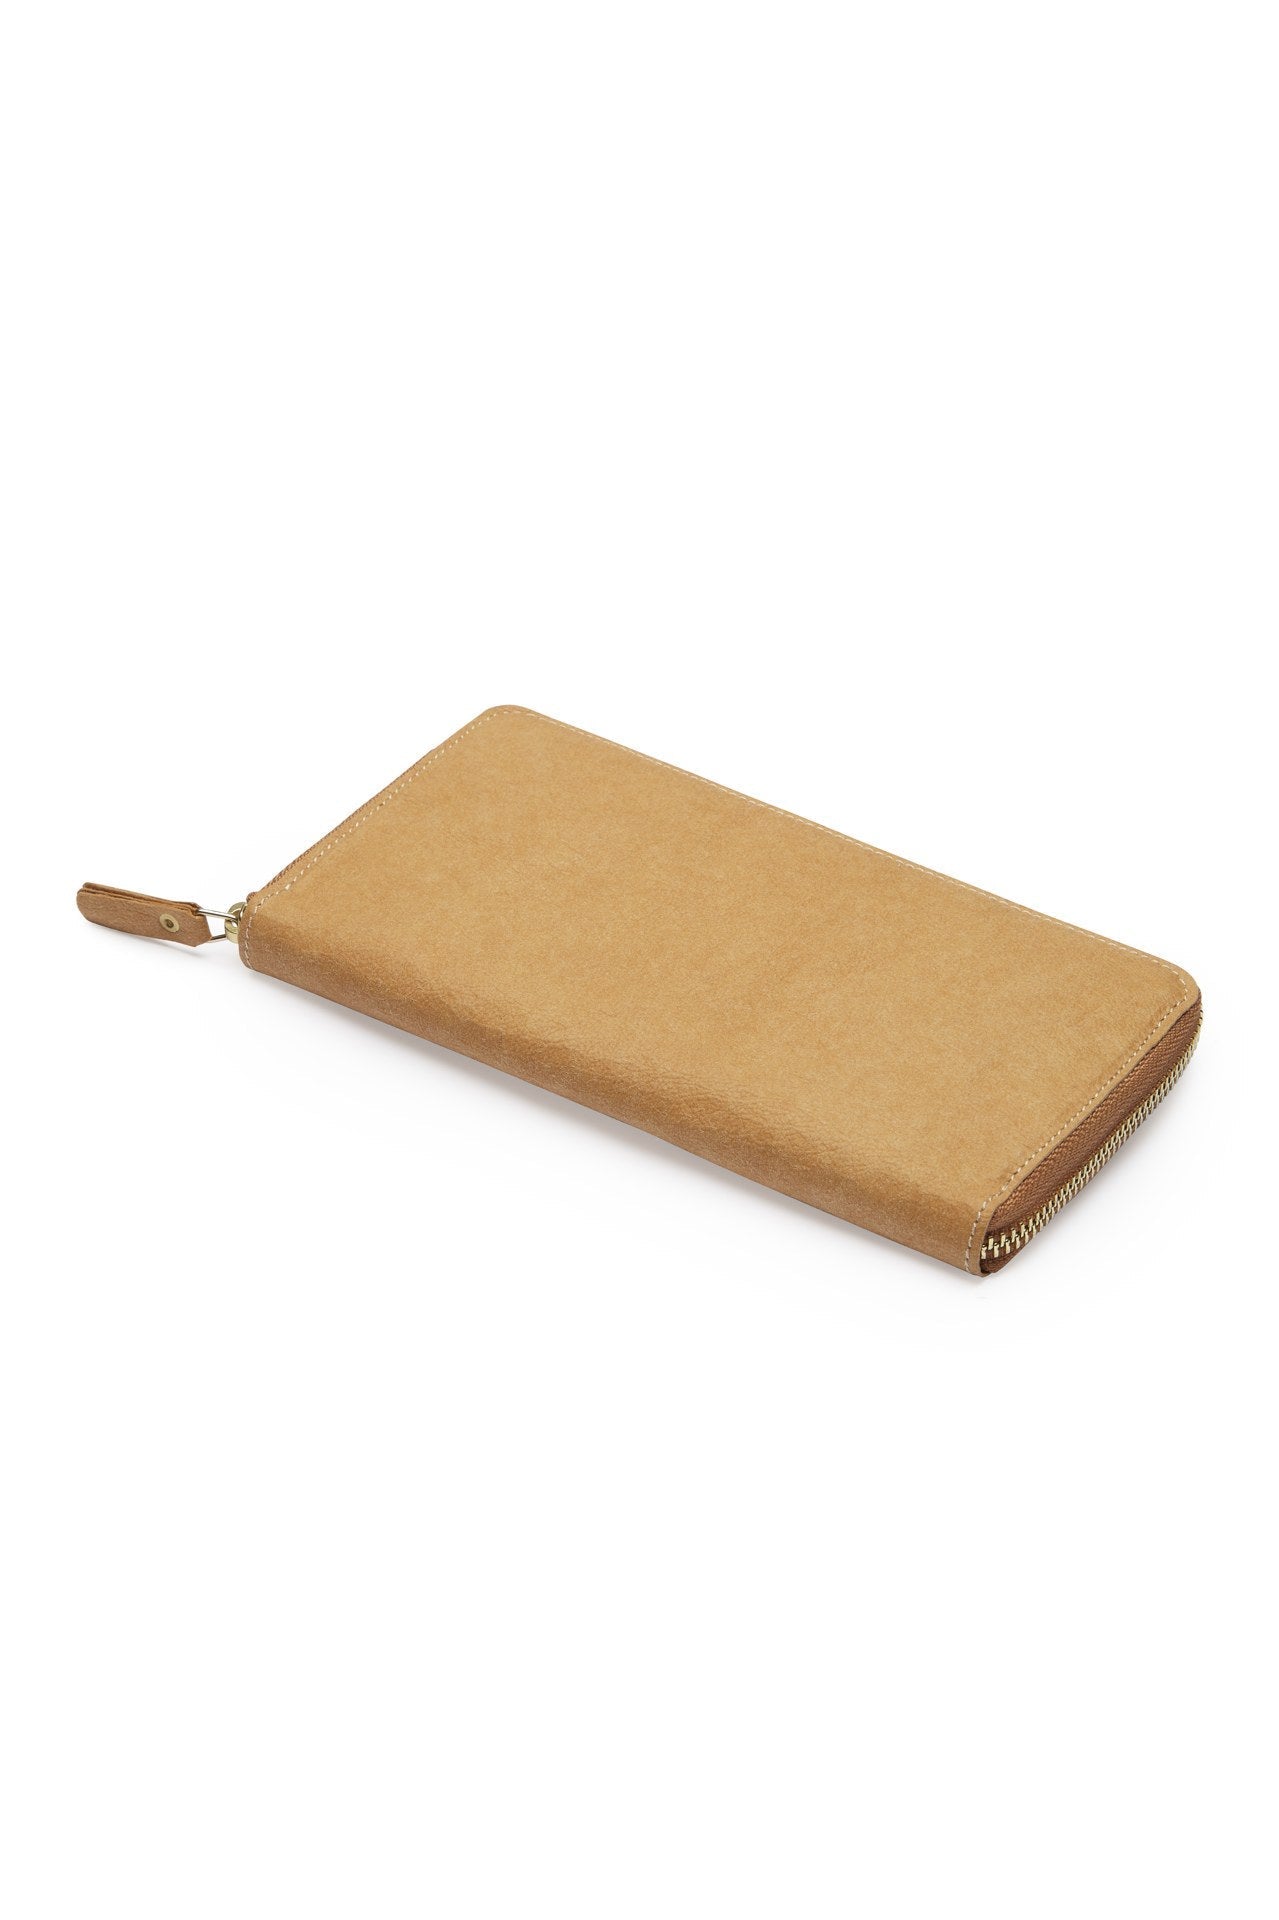 The outside of a large zippered washable paper wallet is shown. The image also shows a silver zip and washable paper zip pull. The wallet shown is tan.